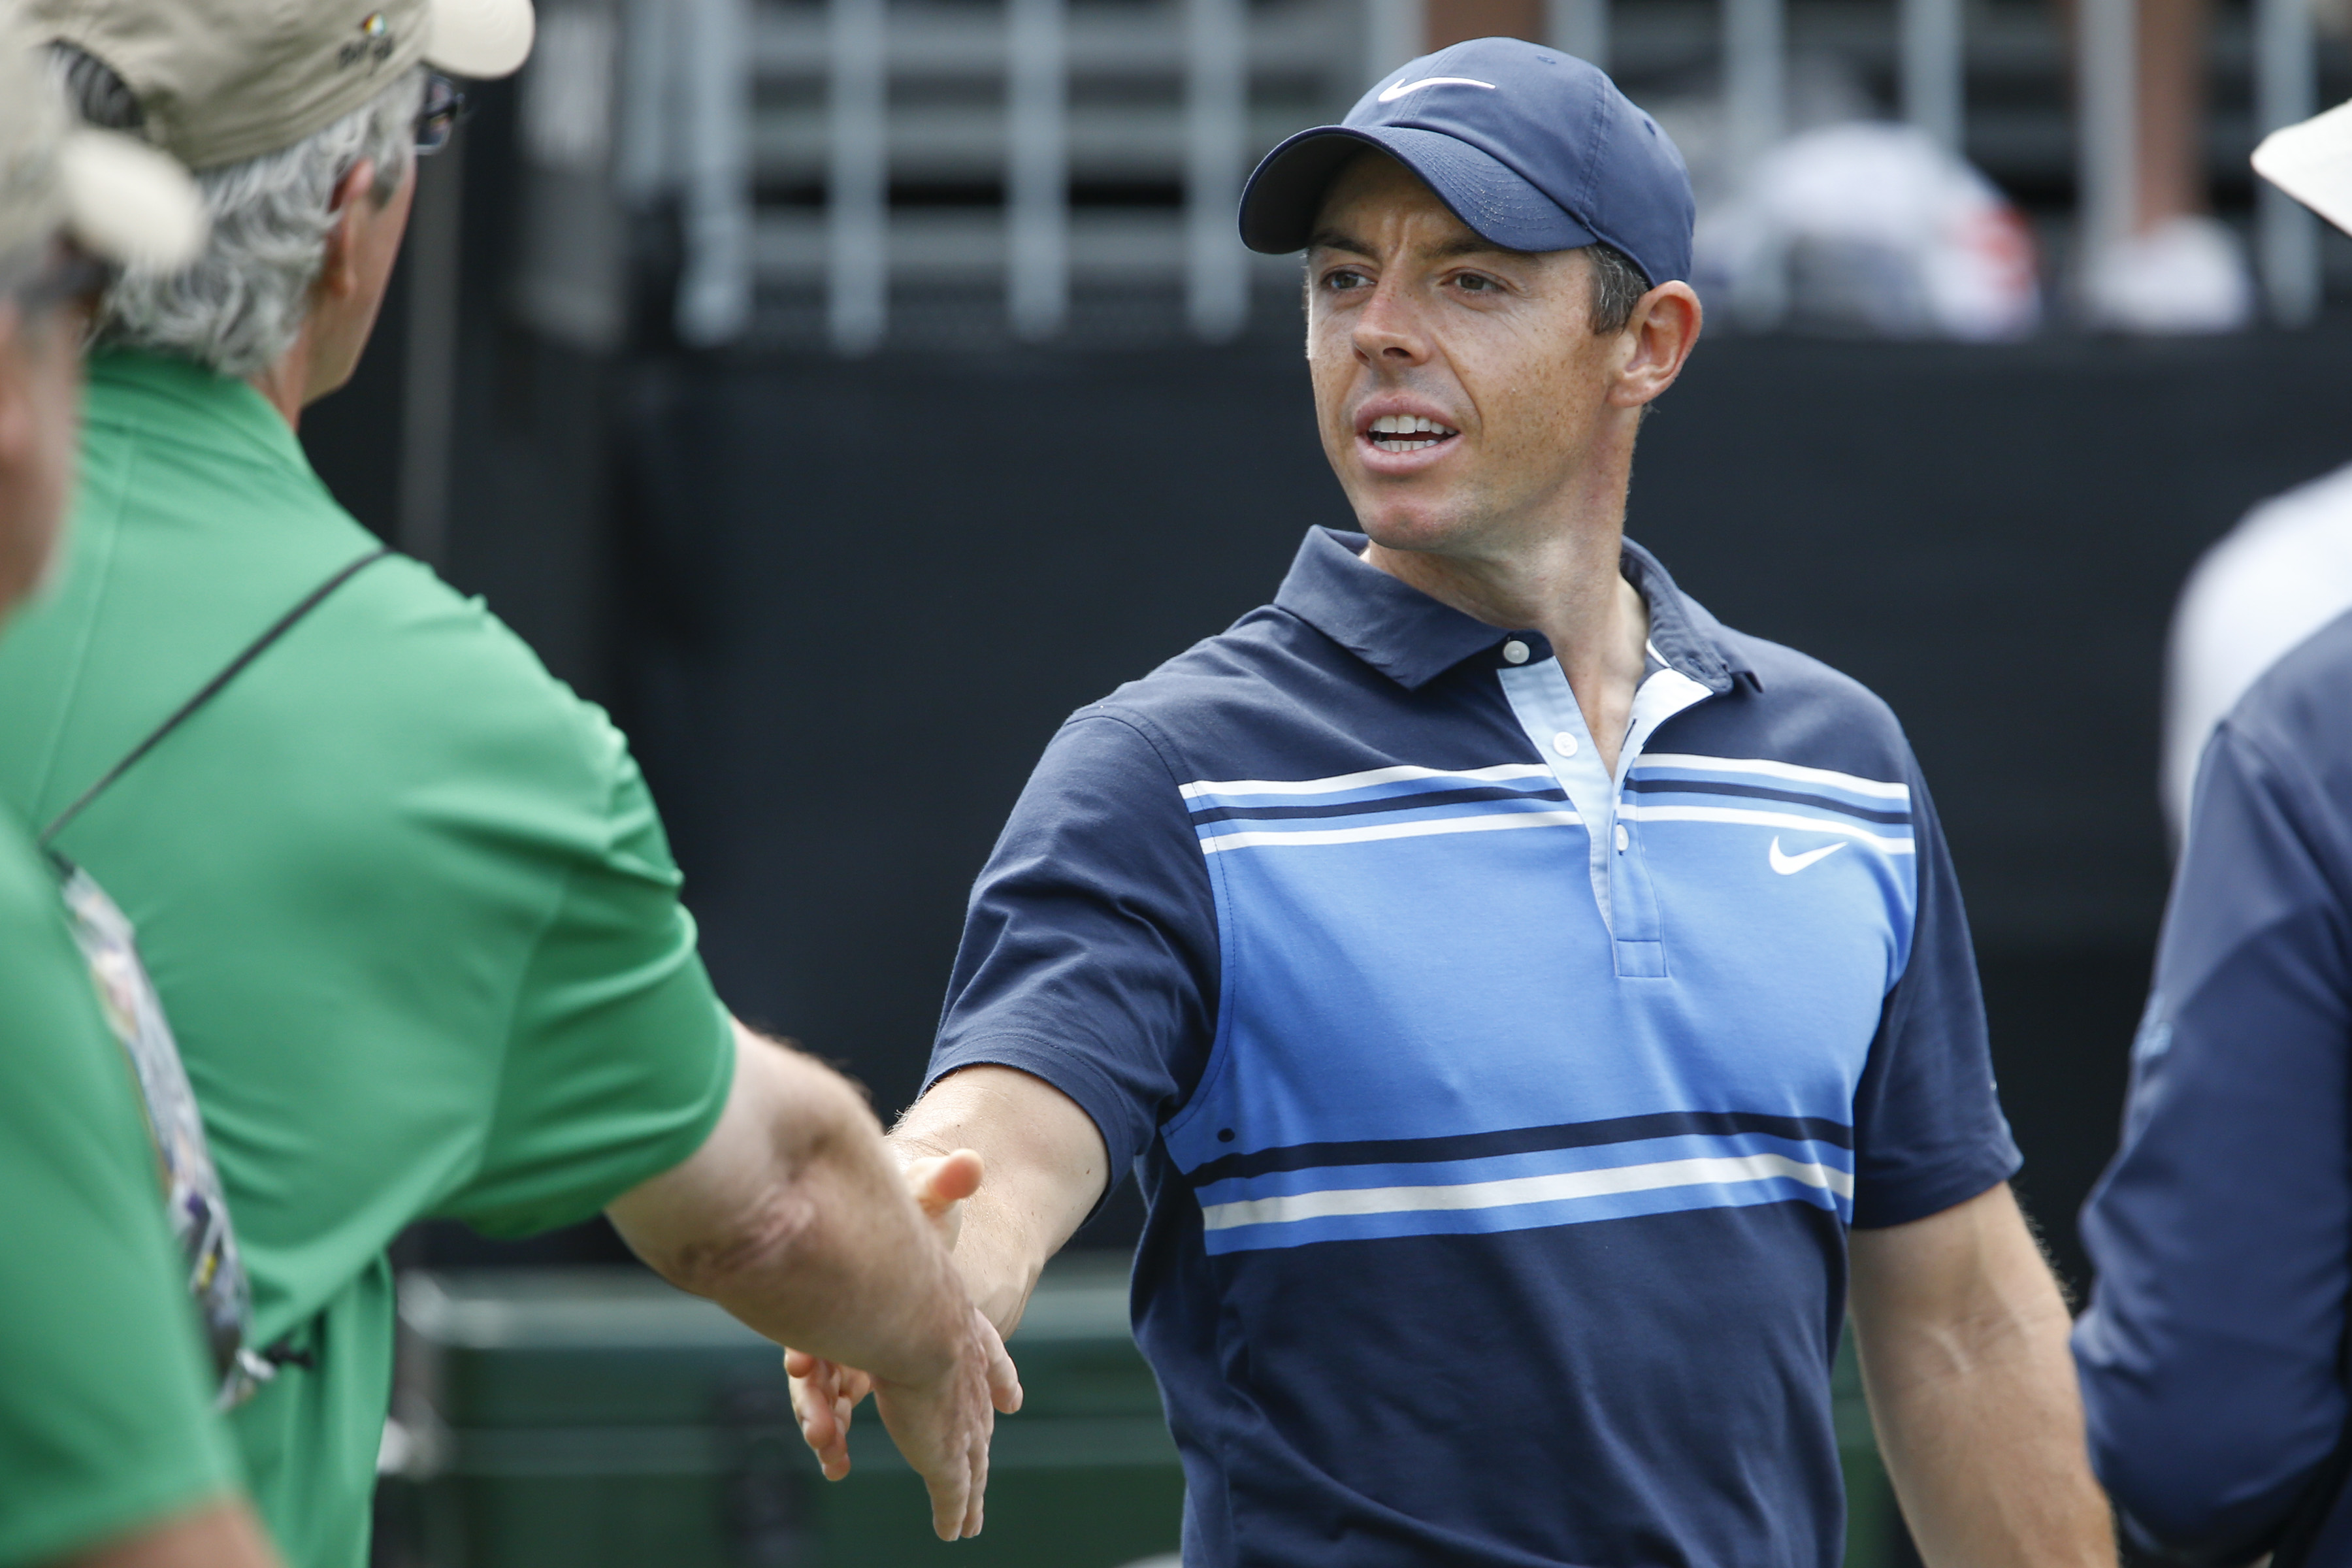 Rory McIlroy compares Pete Dye courses to like drinking beer